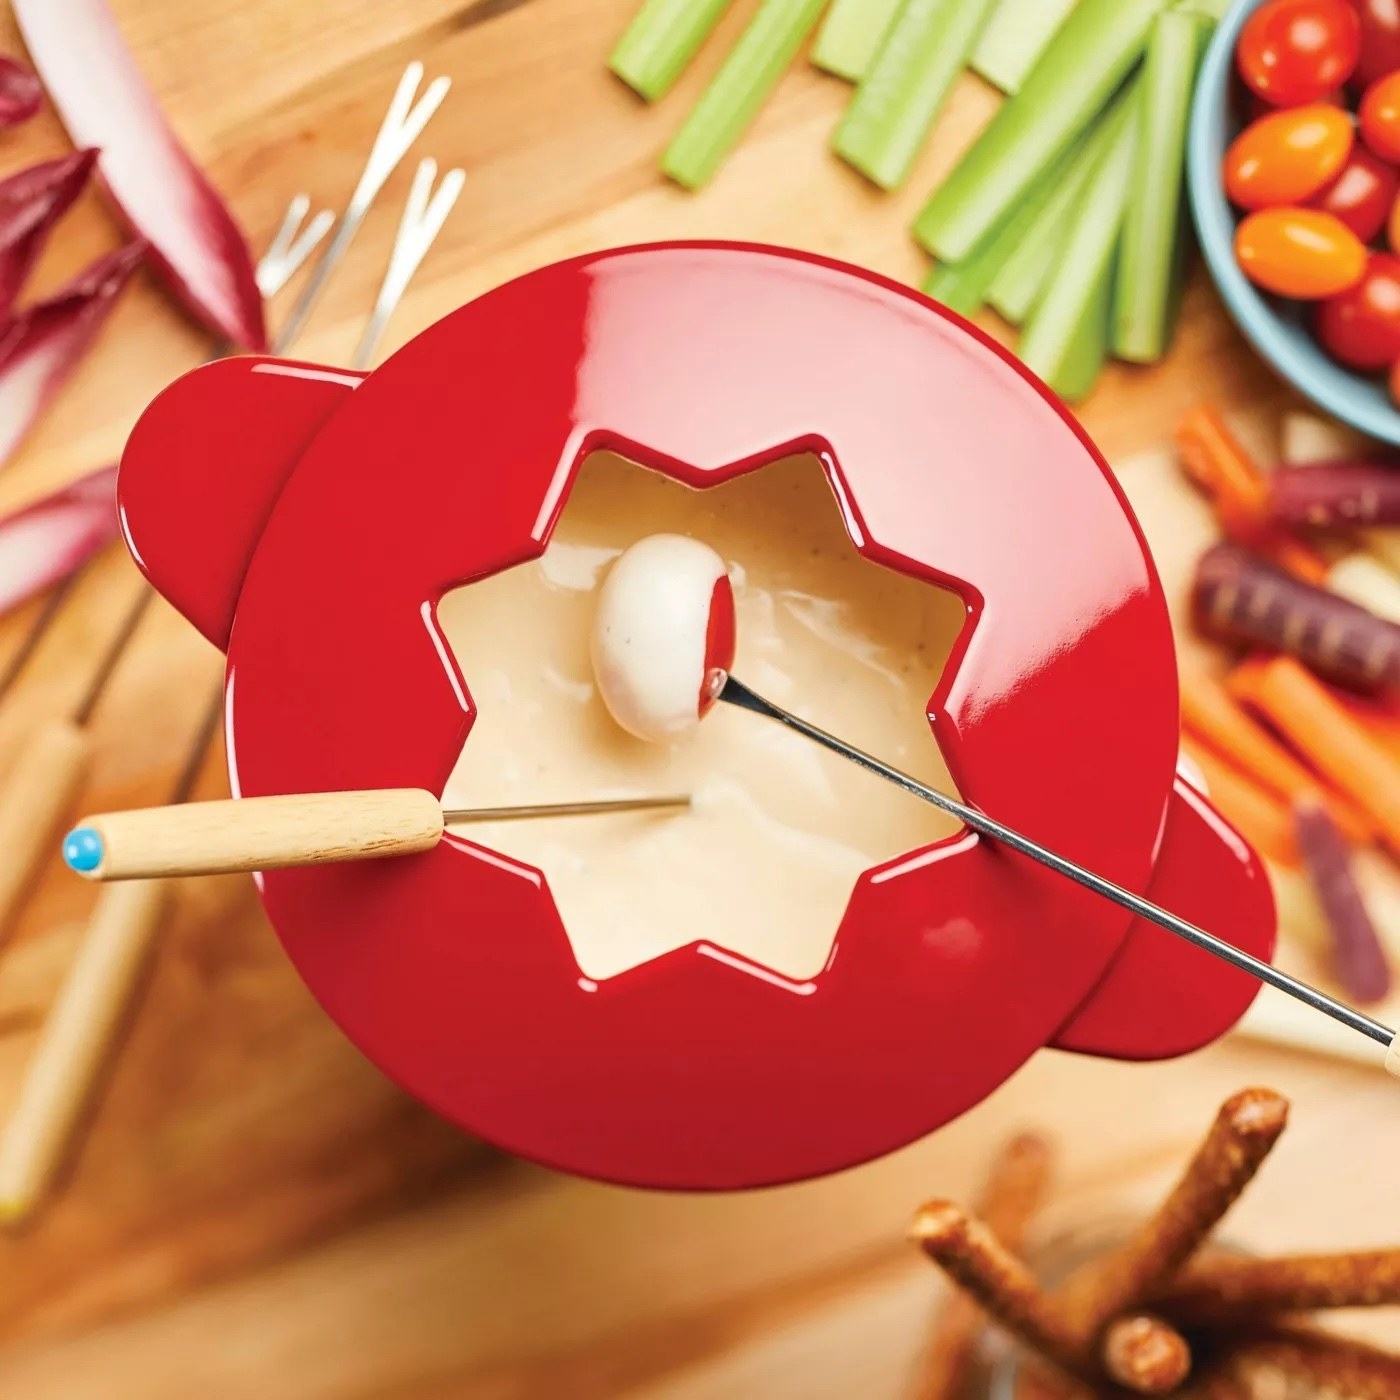 A bright red fondue pot with cheese